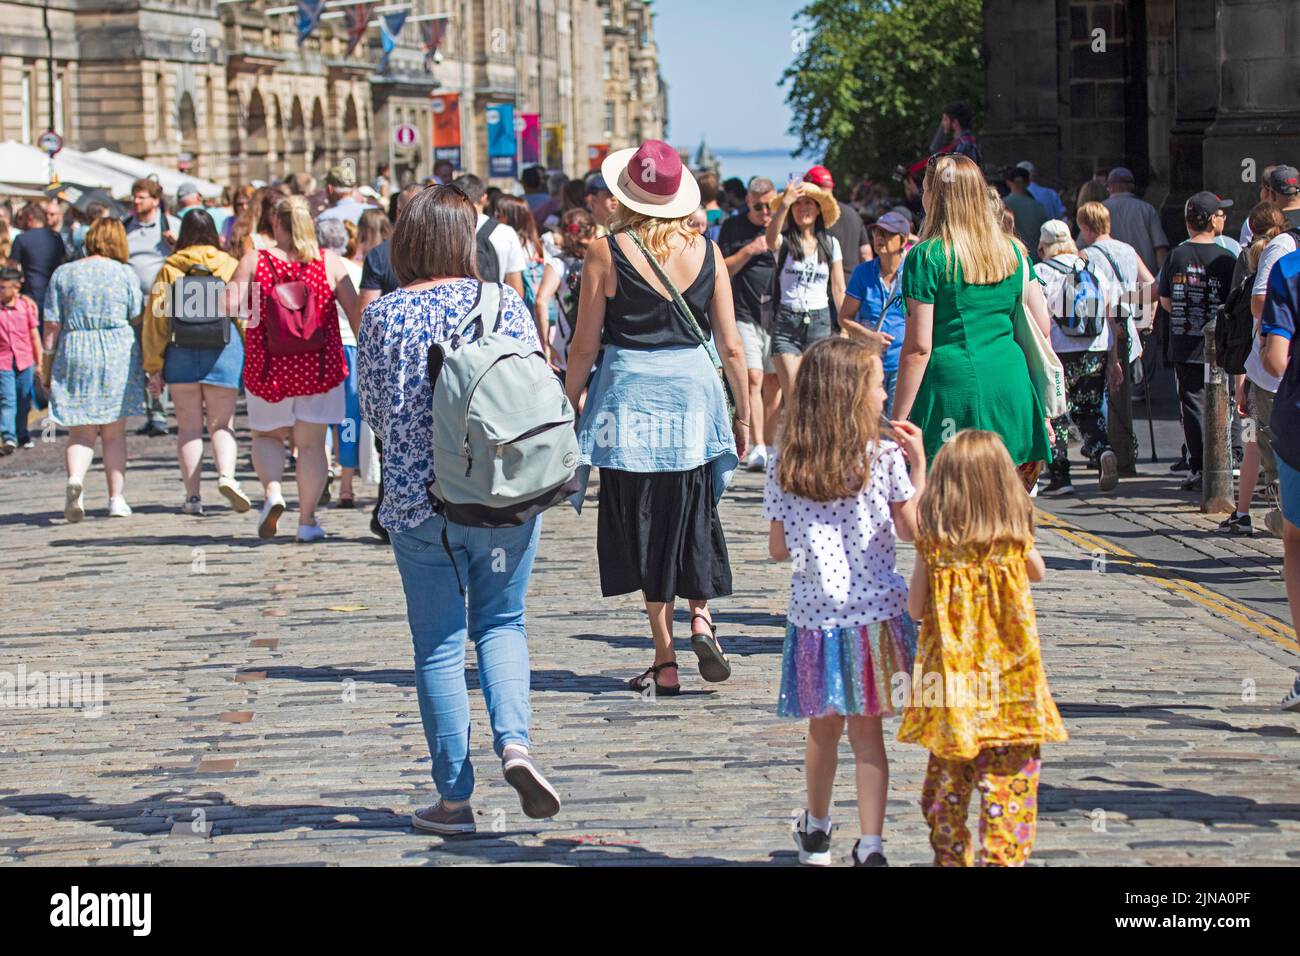 City centre, Edinburgh, Scotland, UK. 10th August 2022. Very hot in busy city High Street 26 fegrees centigrade in the afternoon. Credit: Arch White/alamy live news. Stock Photo